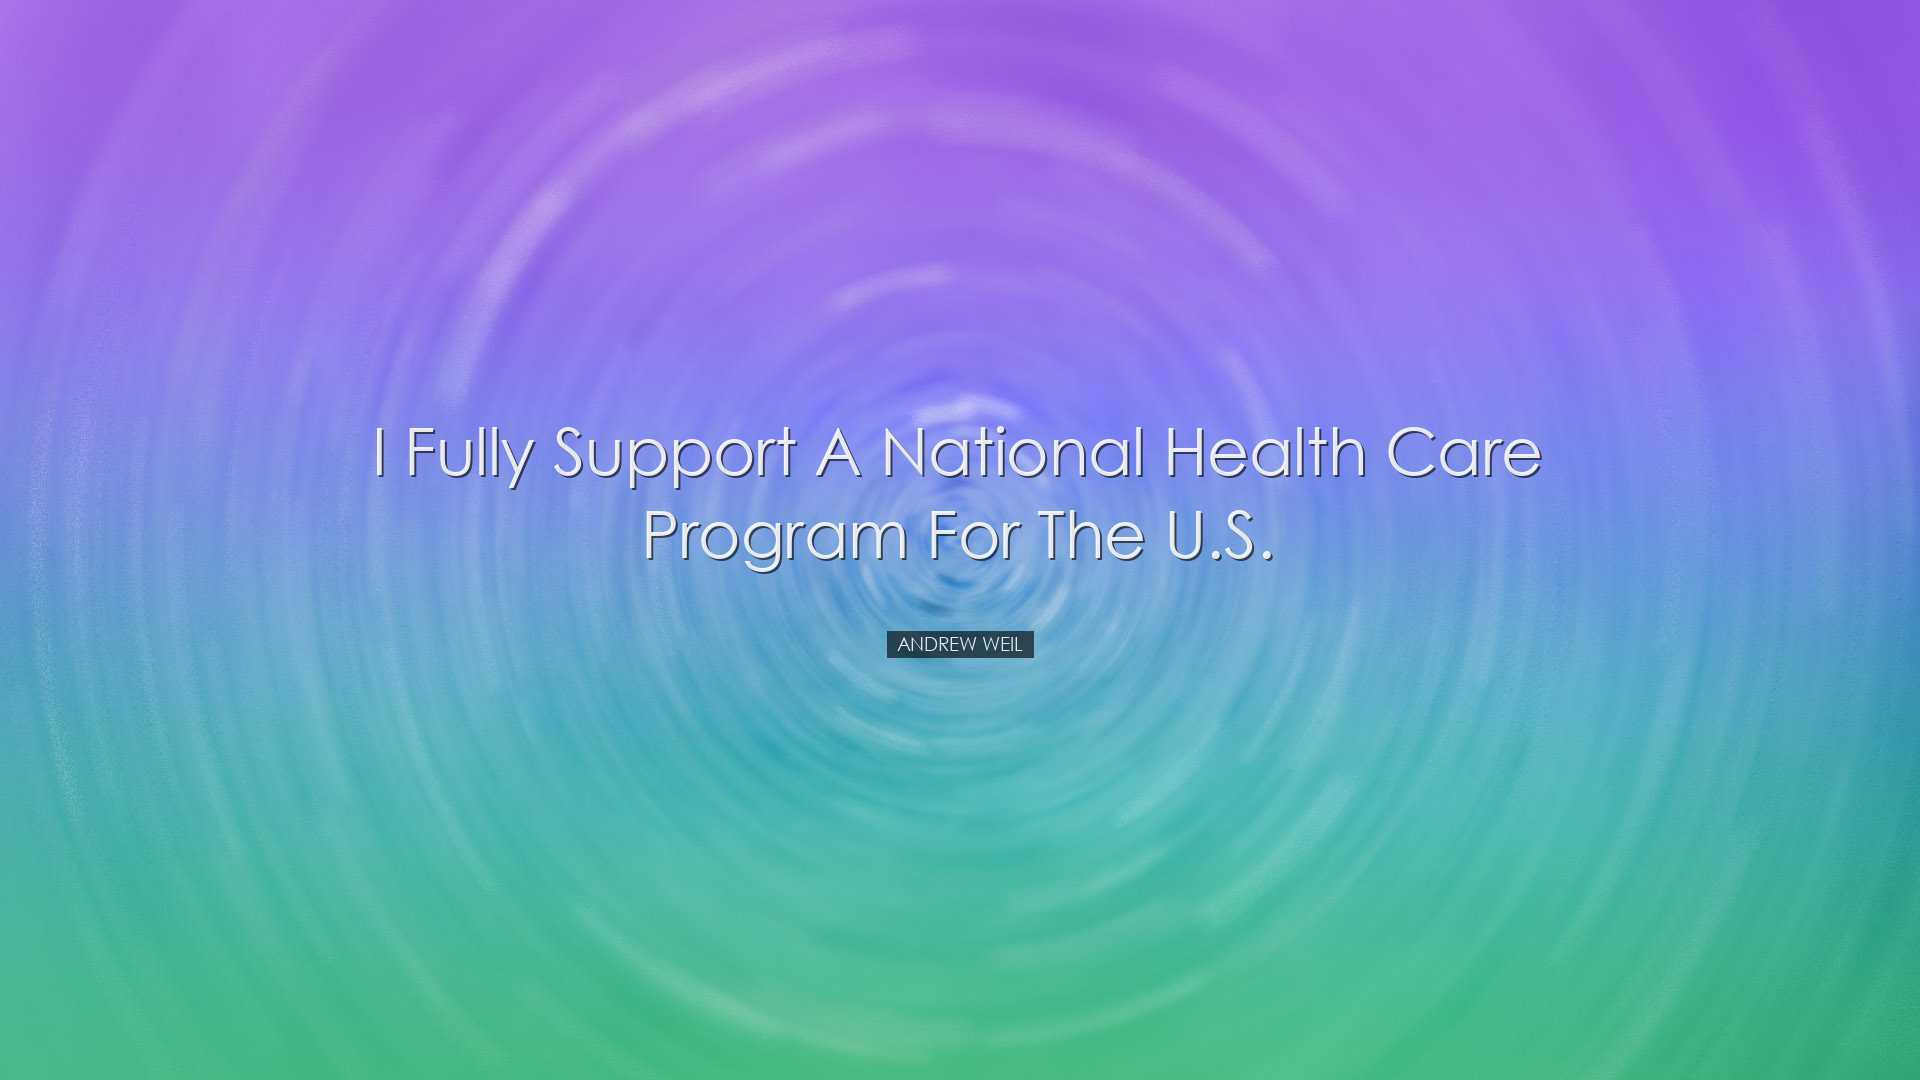 I fully support a national health care program for the U.S. - Andr